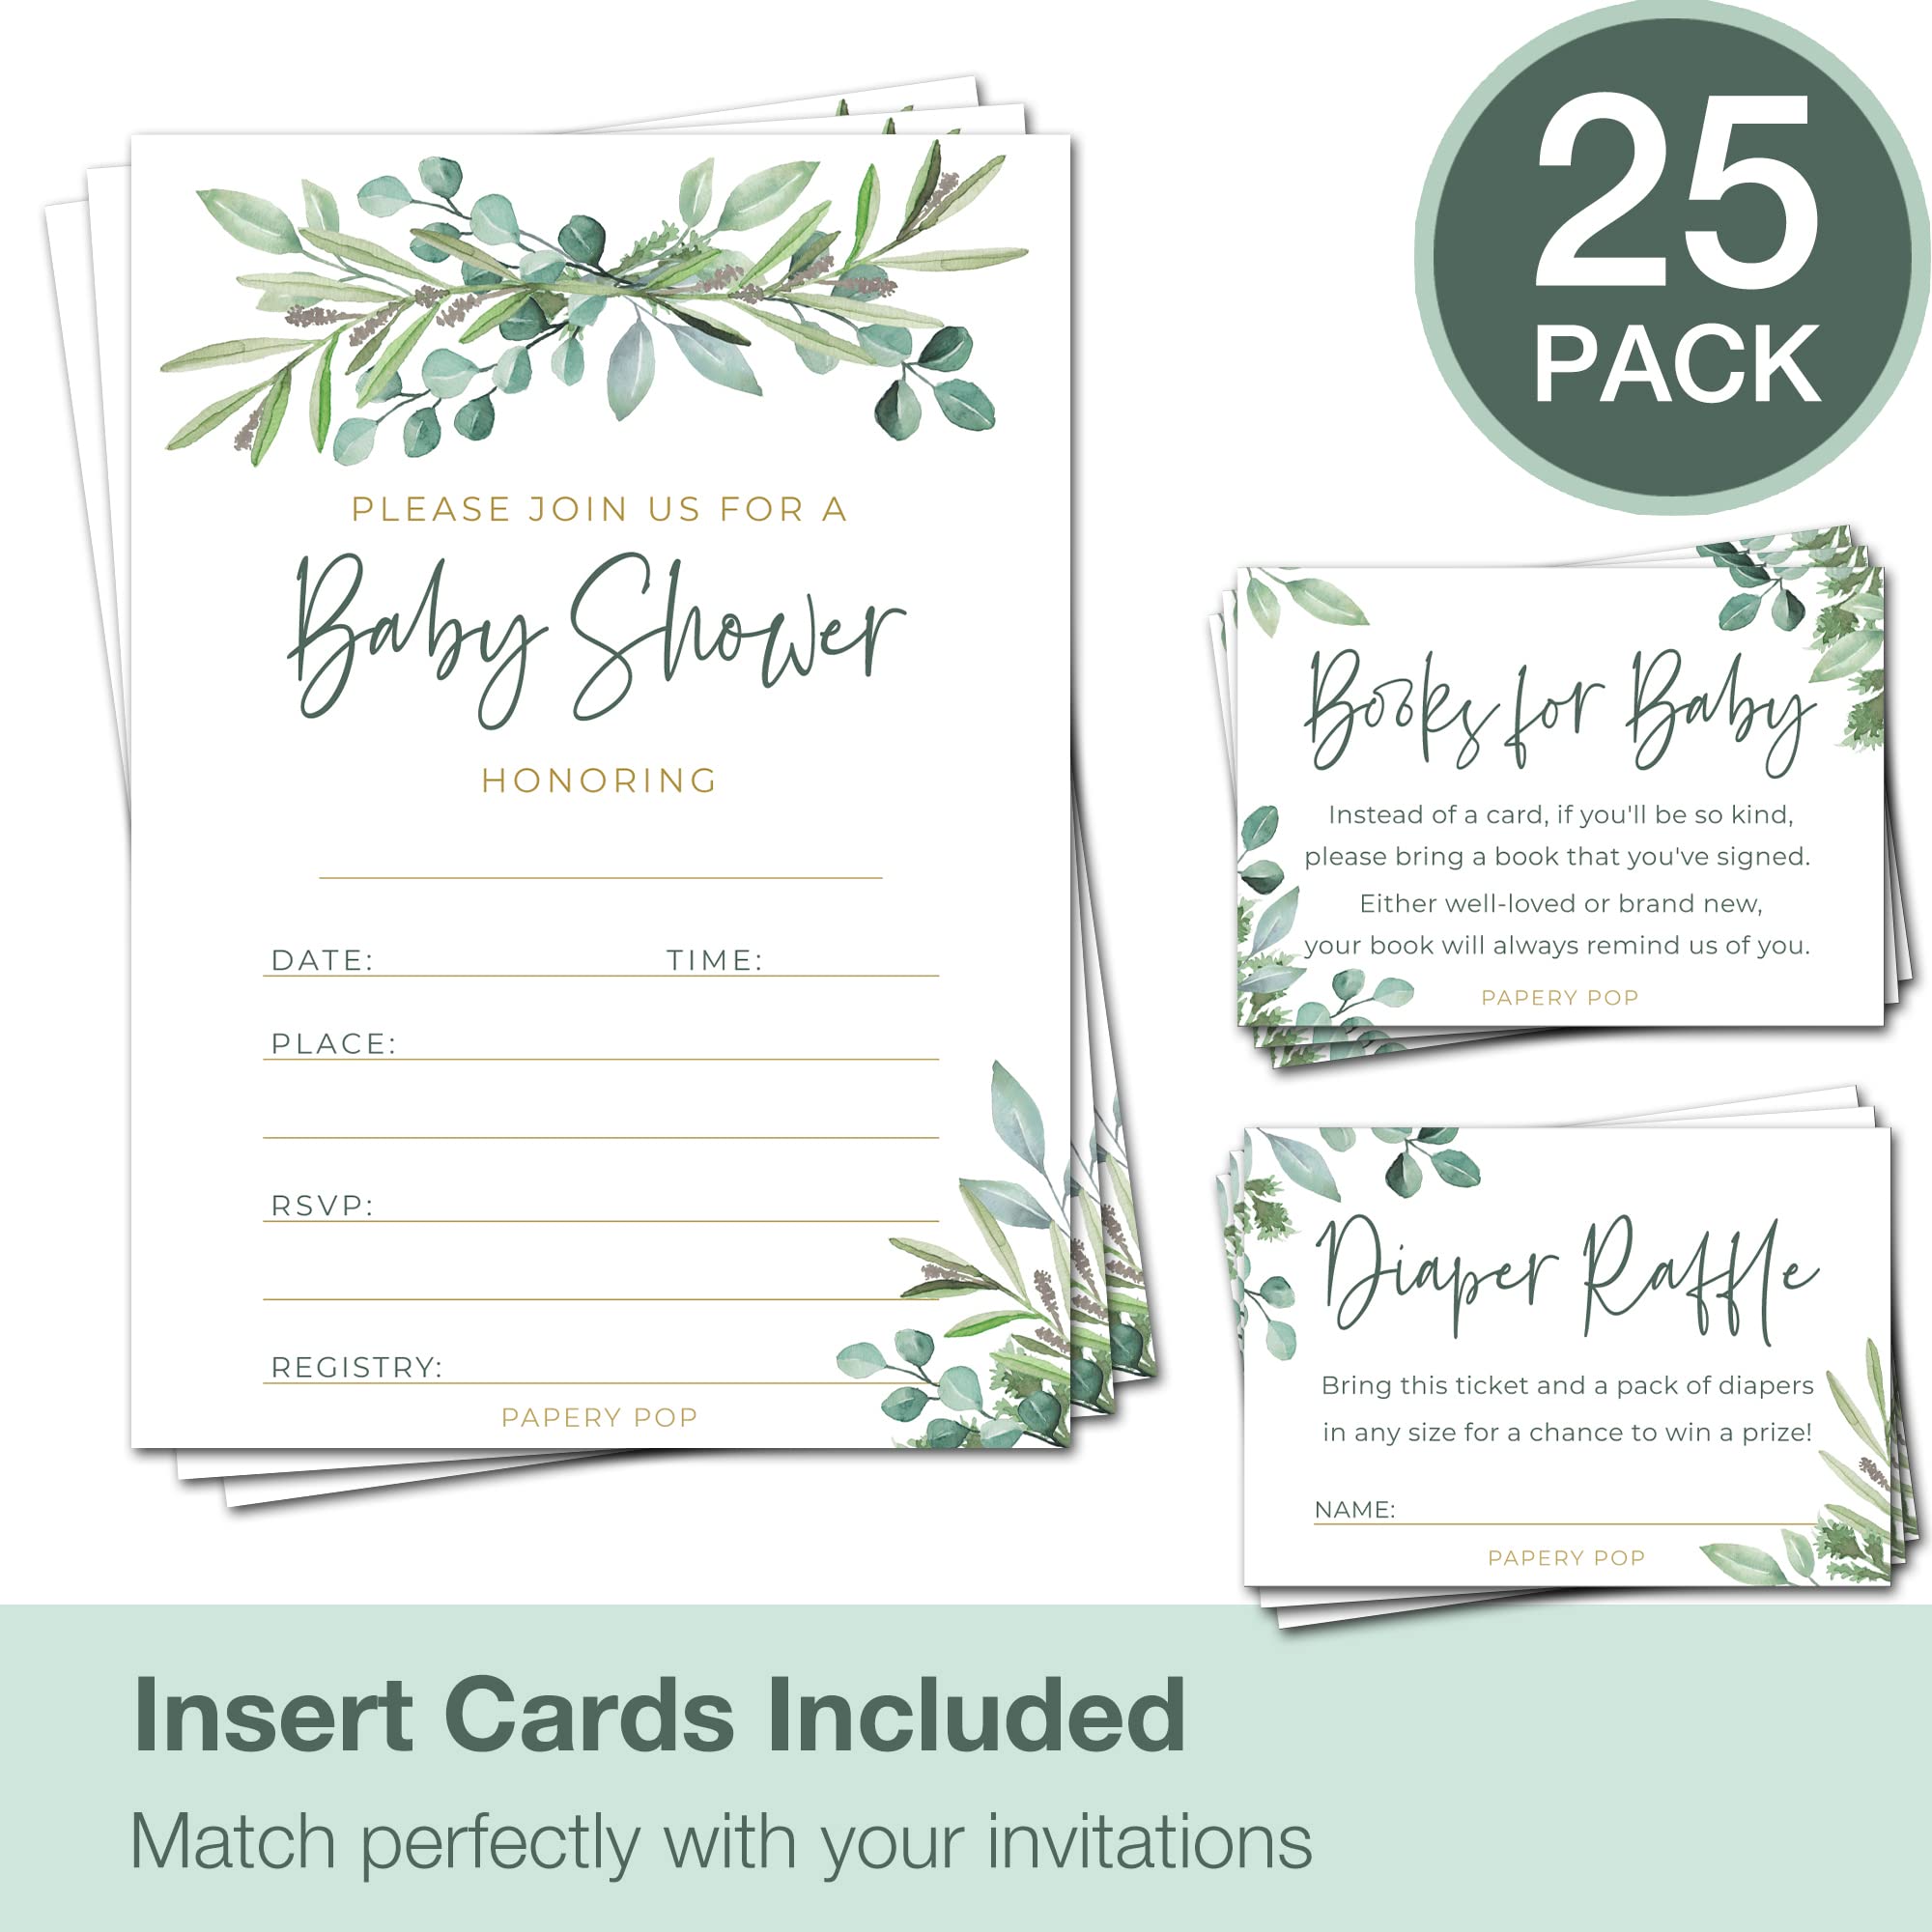 Set of 25 Baby Shower Invitations with Envelopes, Diaper Raffle Tickets and Baby Shower Book Request Cards - Eucalyptus